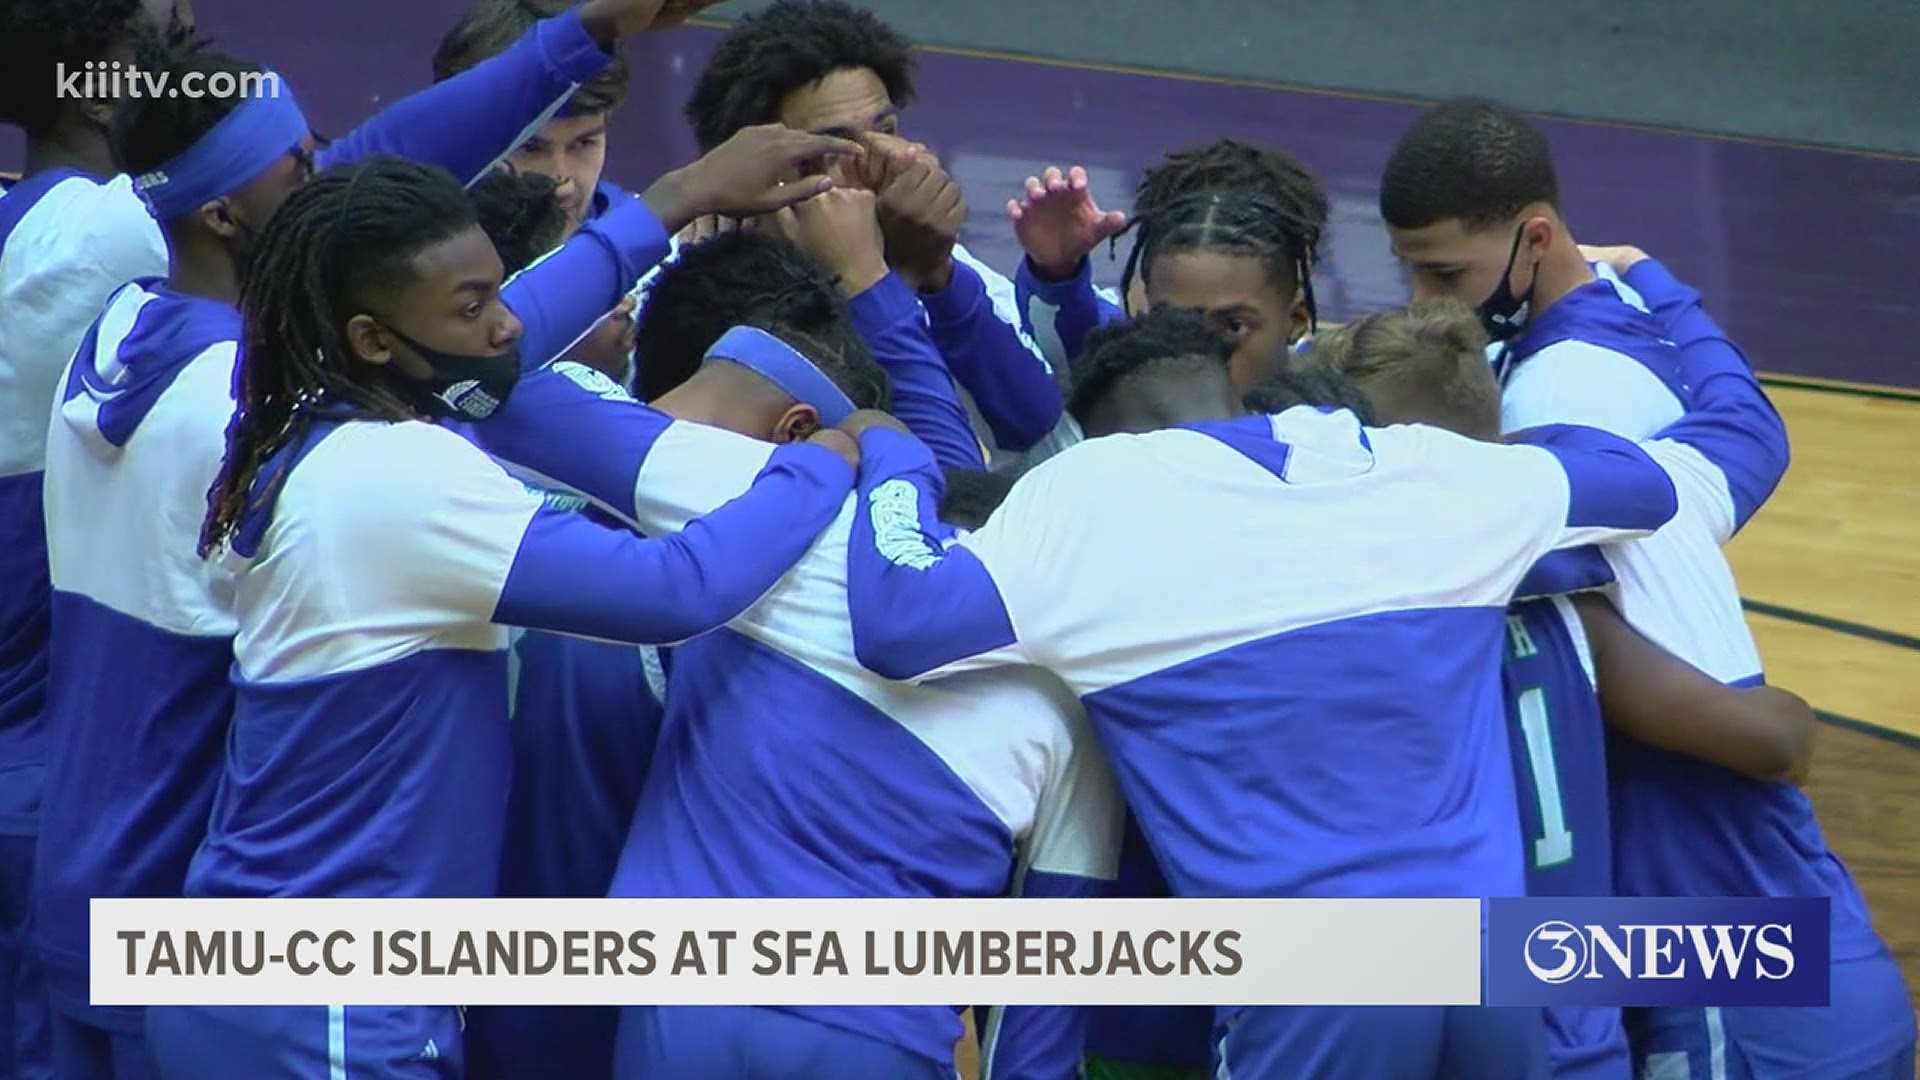 The Lumberjacks jumped out to an 11-0 lead and never looked back in an 80-68 win over the Islanders.